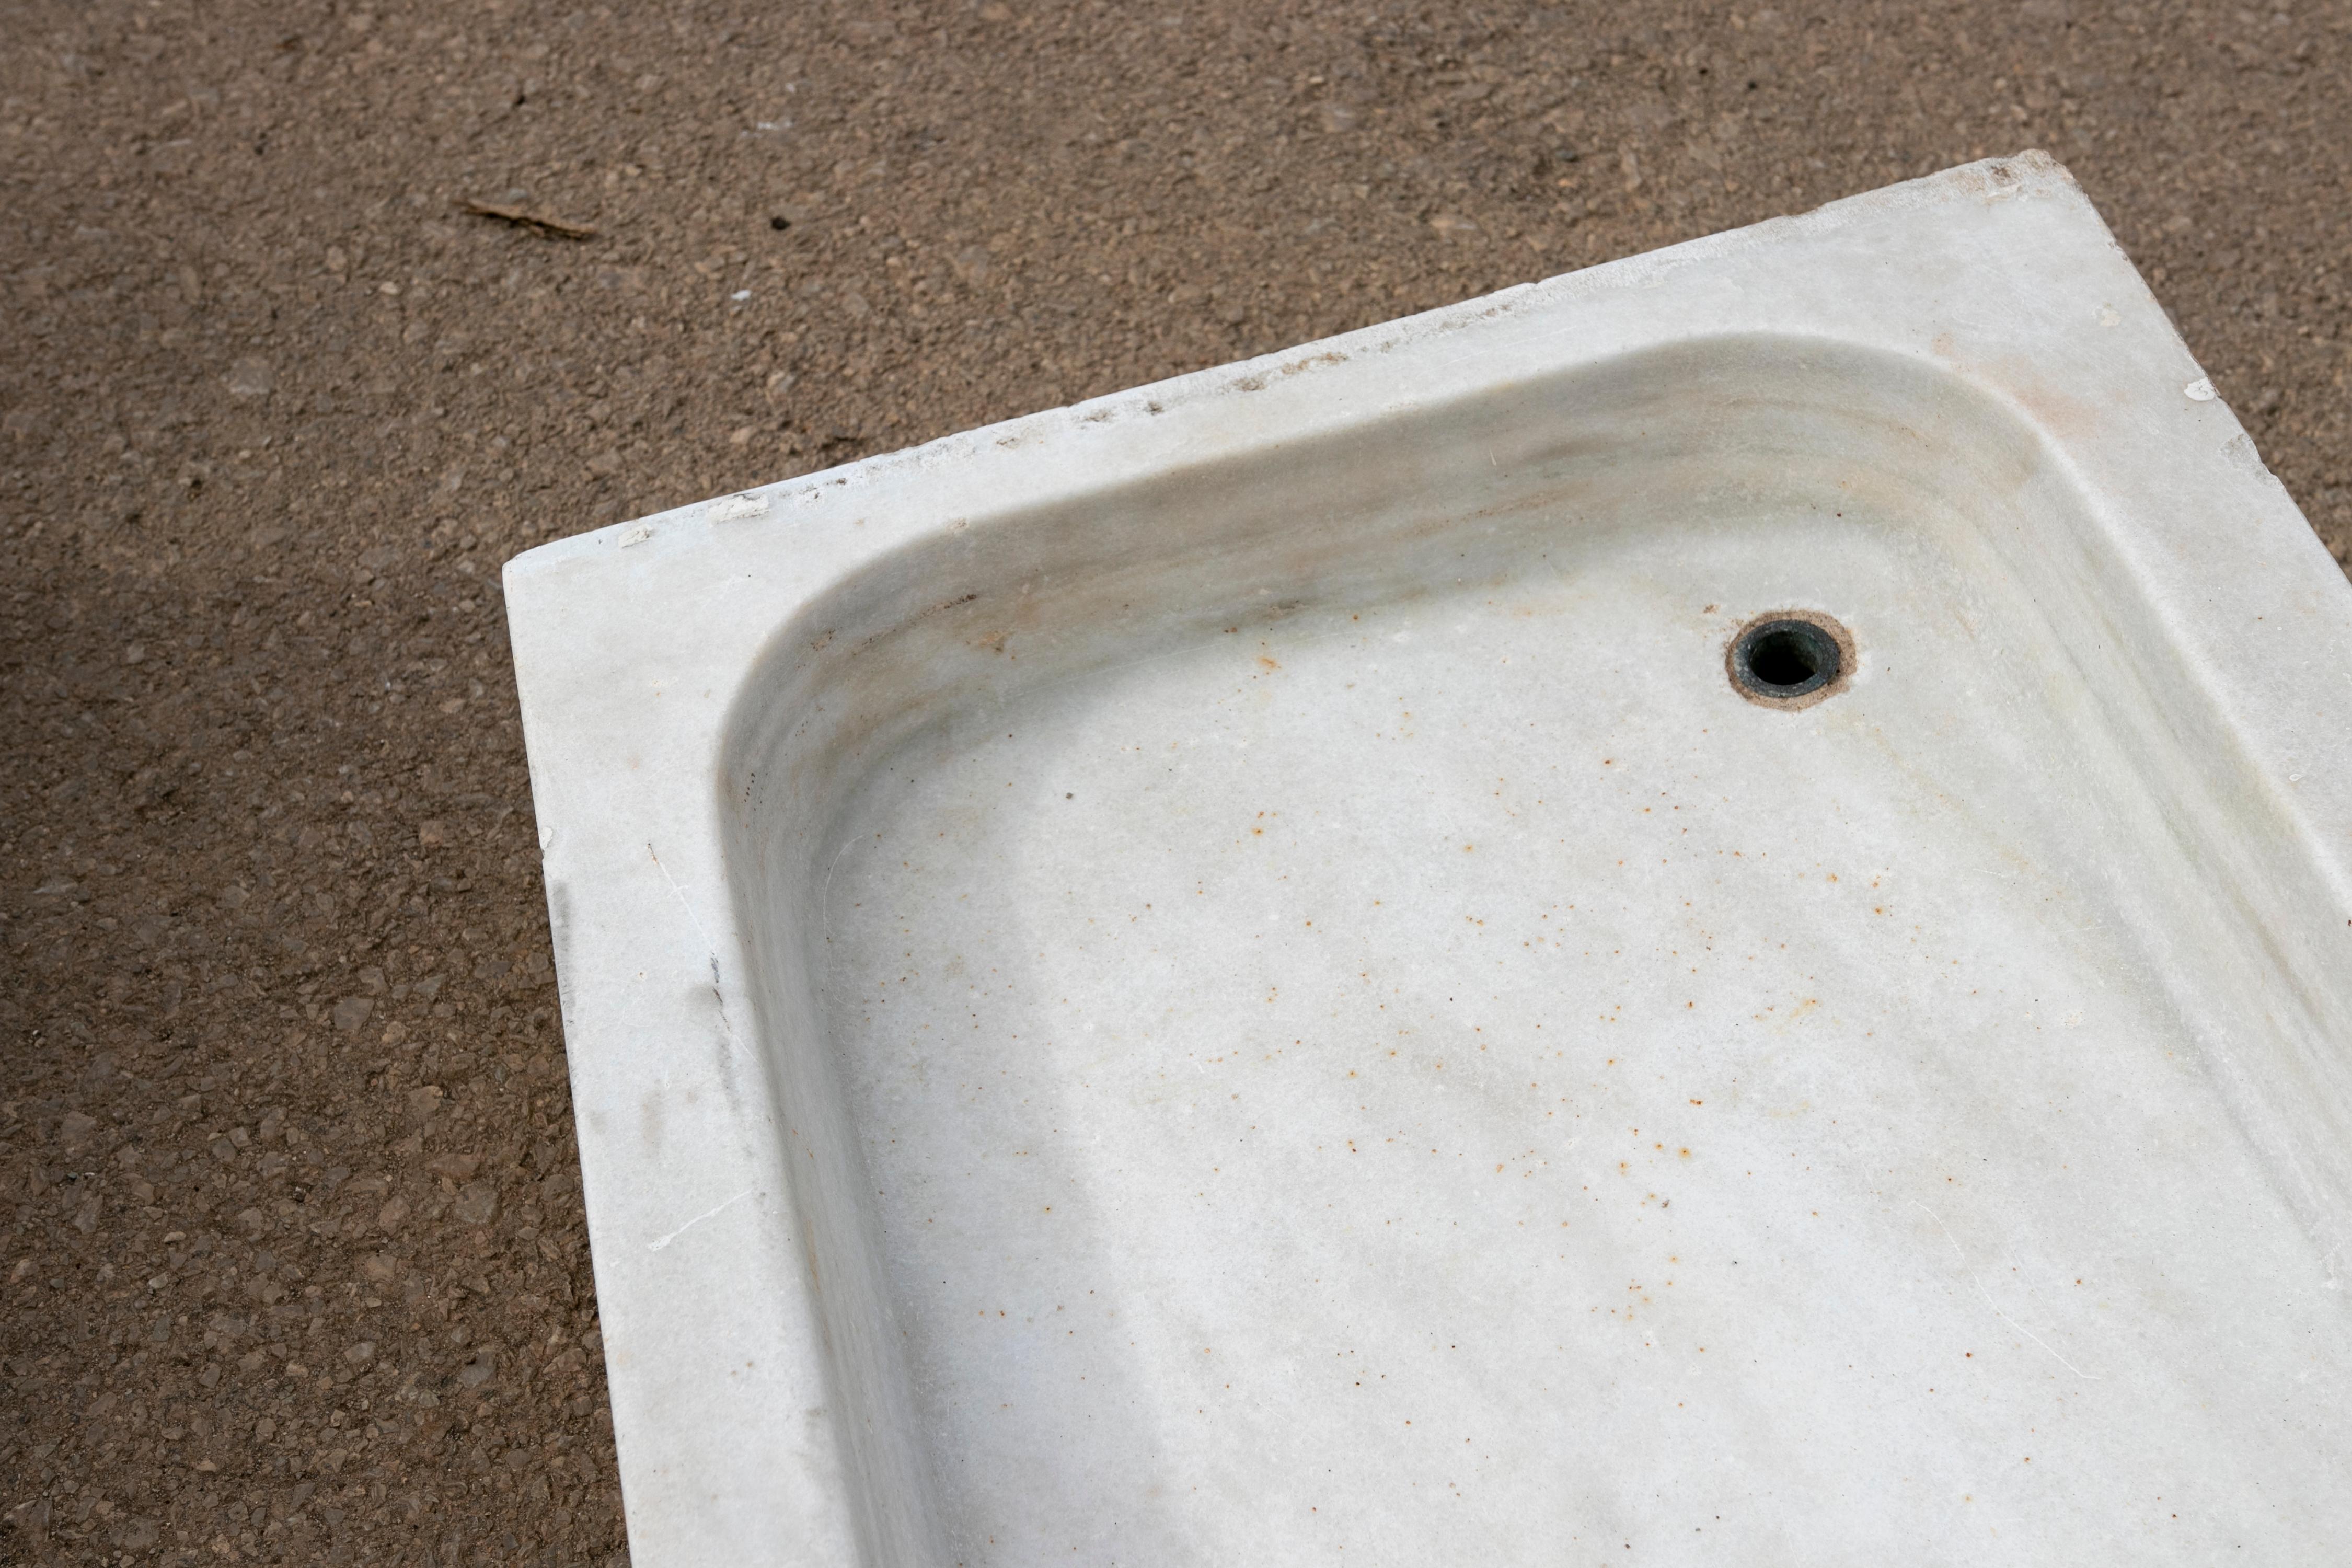 19th Century Antique Spanish White Marble Sink For Sale 4